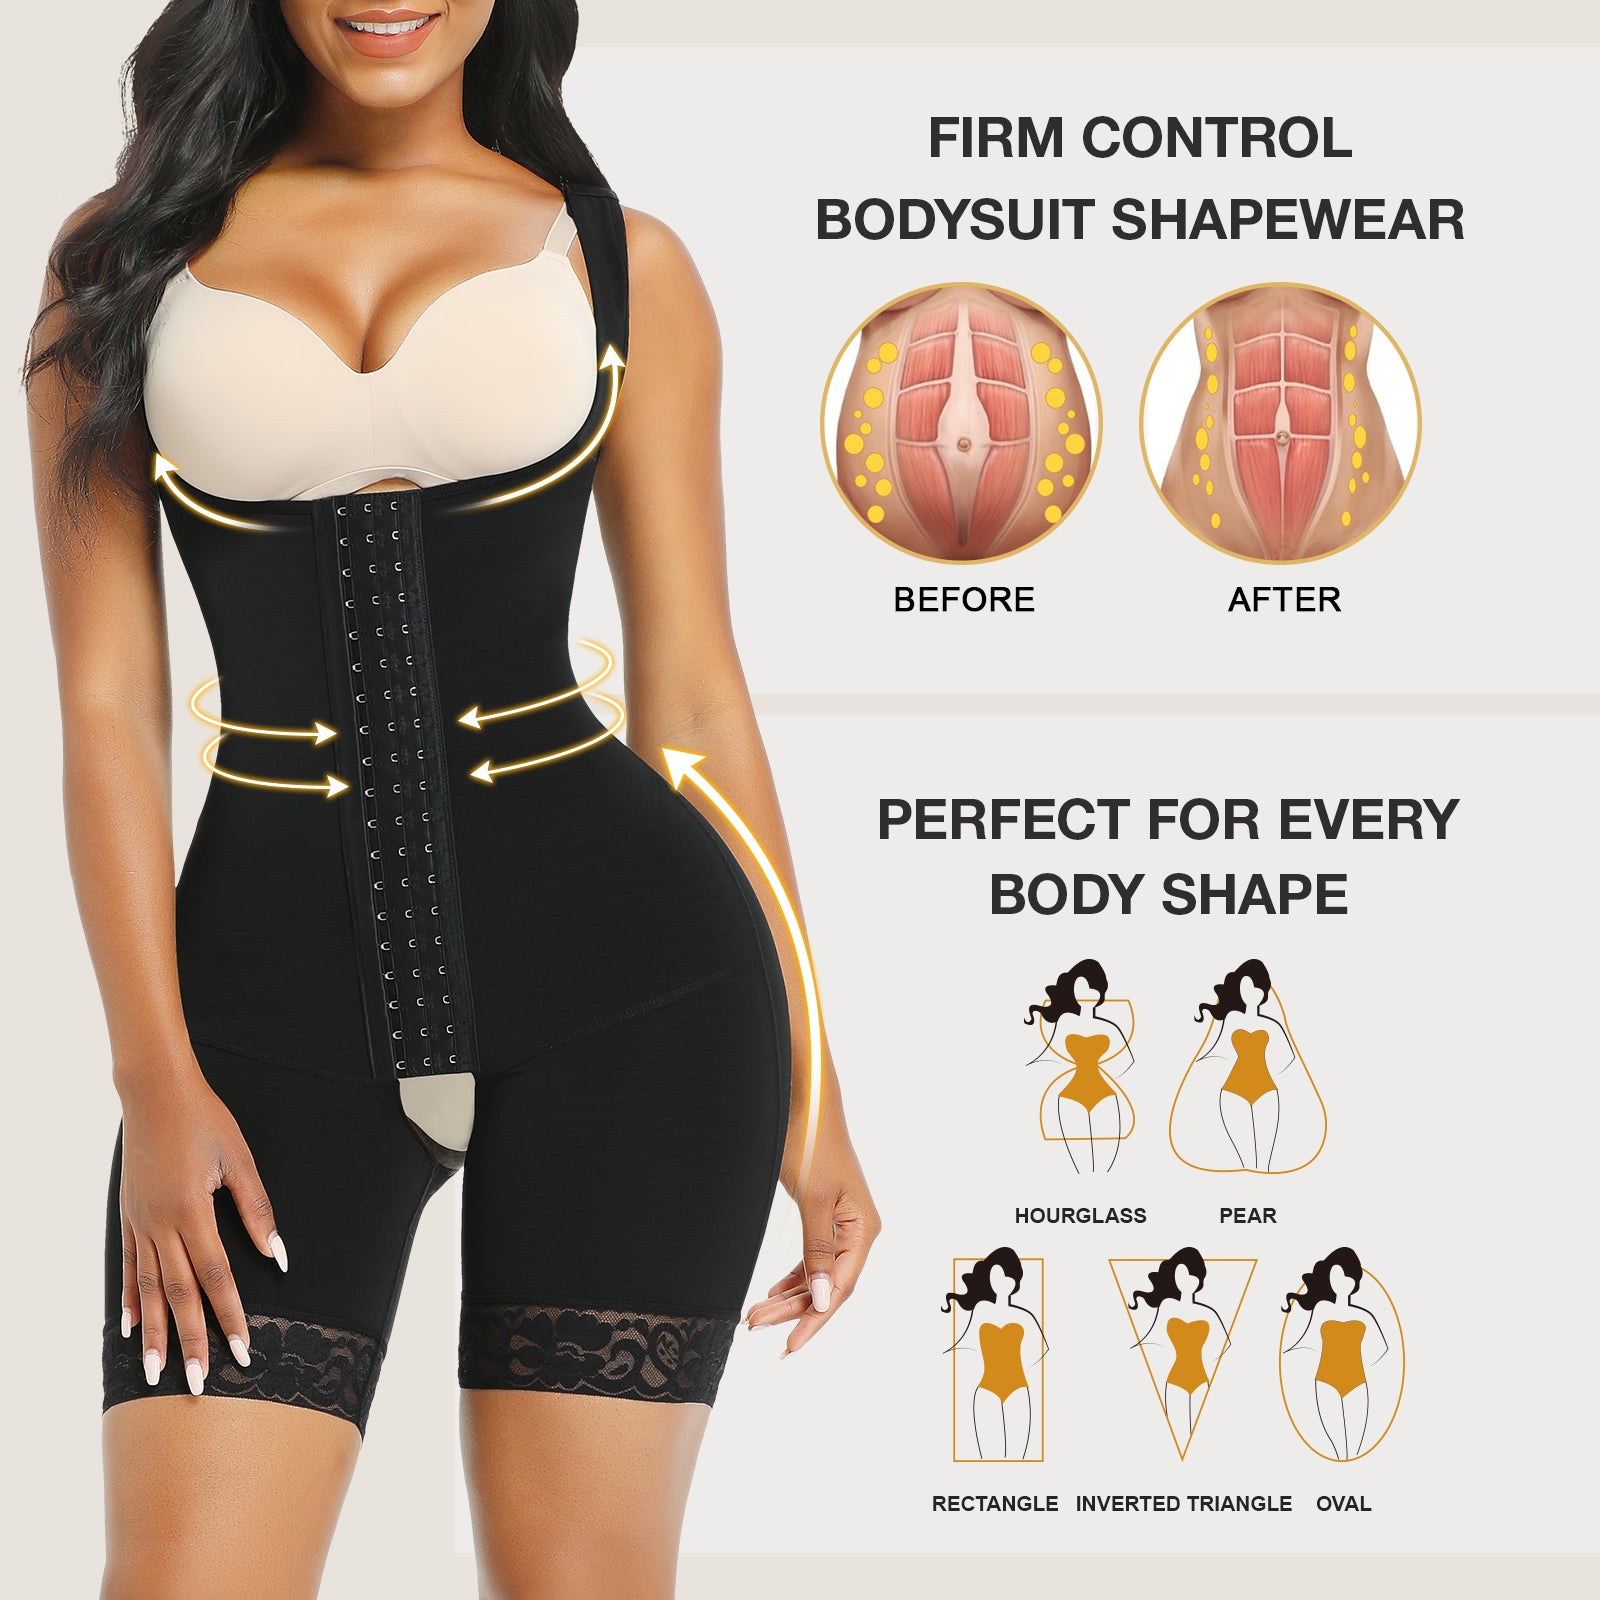  Fajas Colombianas Post Surgery Compression Garment